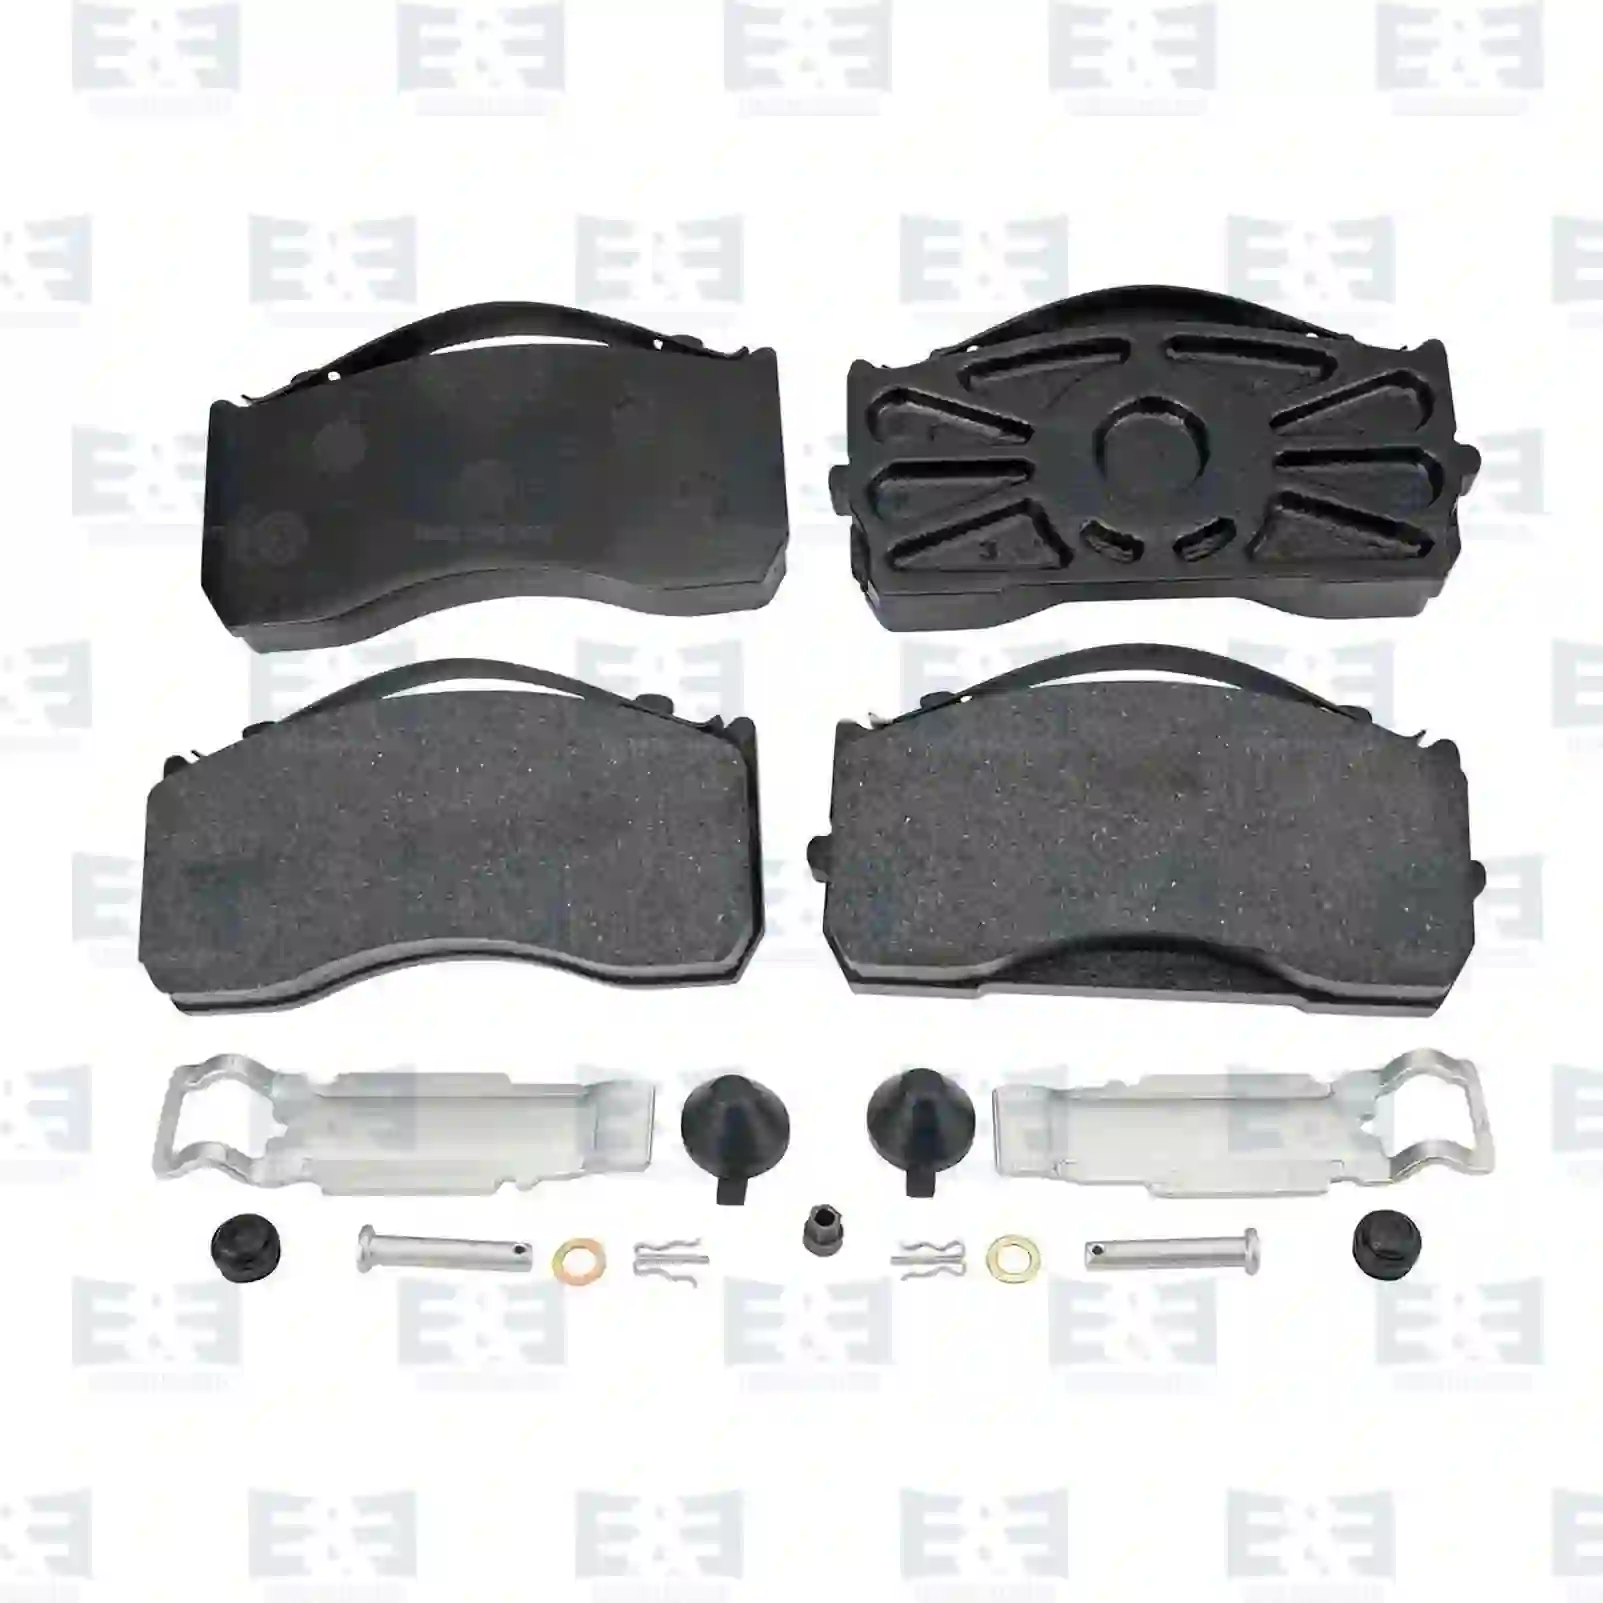 Brake Disc Disc brake pad kit, with accessory kit, EE No 2E2297458 ,  oem no:0980107070, 1534100, 1962440, 1962595, 709291042, 9291042, 9291045, 9291048, 9291049, 81508205074, 81508206040, 81508206043, 81508206054, 81508206063, 0004211110, 0004211210, 0014210410, 0014210510, 0014210610, 0034201120, 0034201220, 0034206620, 0034207220, 0034207320, 0044206120, 0084206520, 0084206620, 6864200120, ZG50433-0008 E&E Truck Spare Parts | Truck Spare Parts, Auotomotive Spare Parts